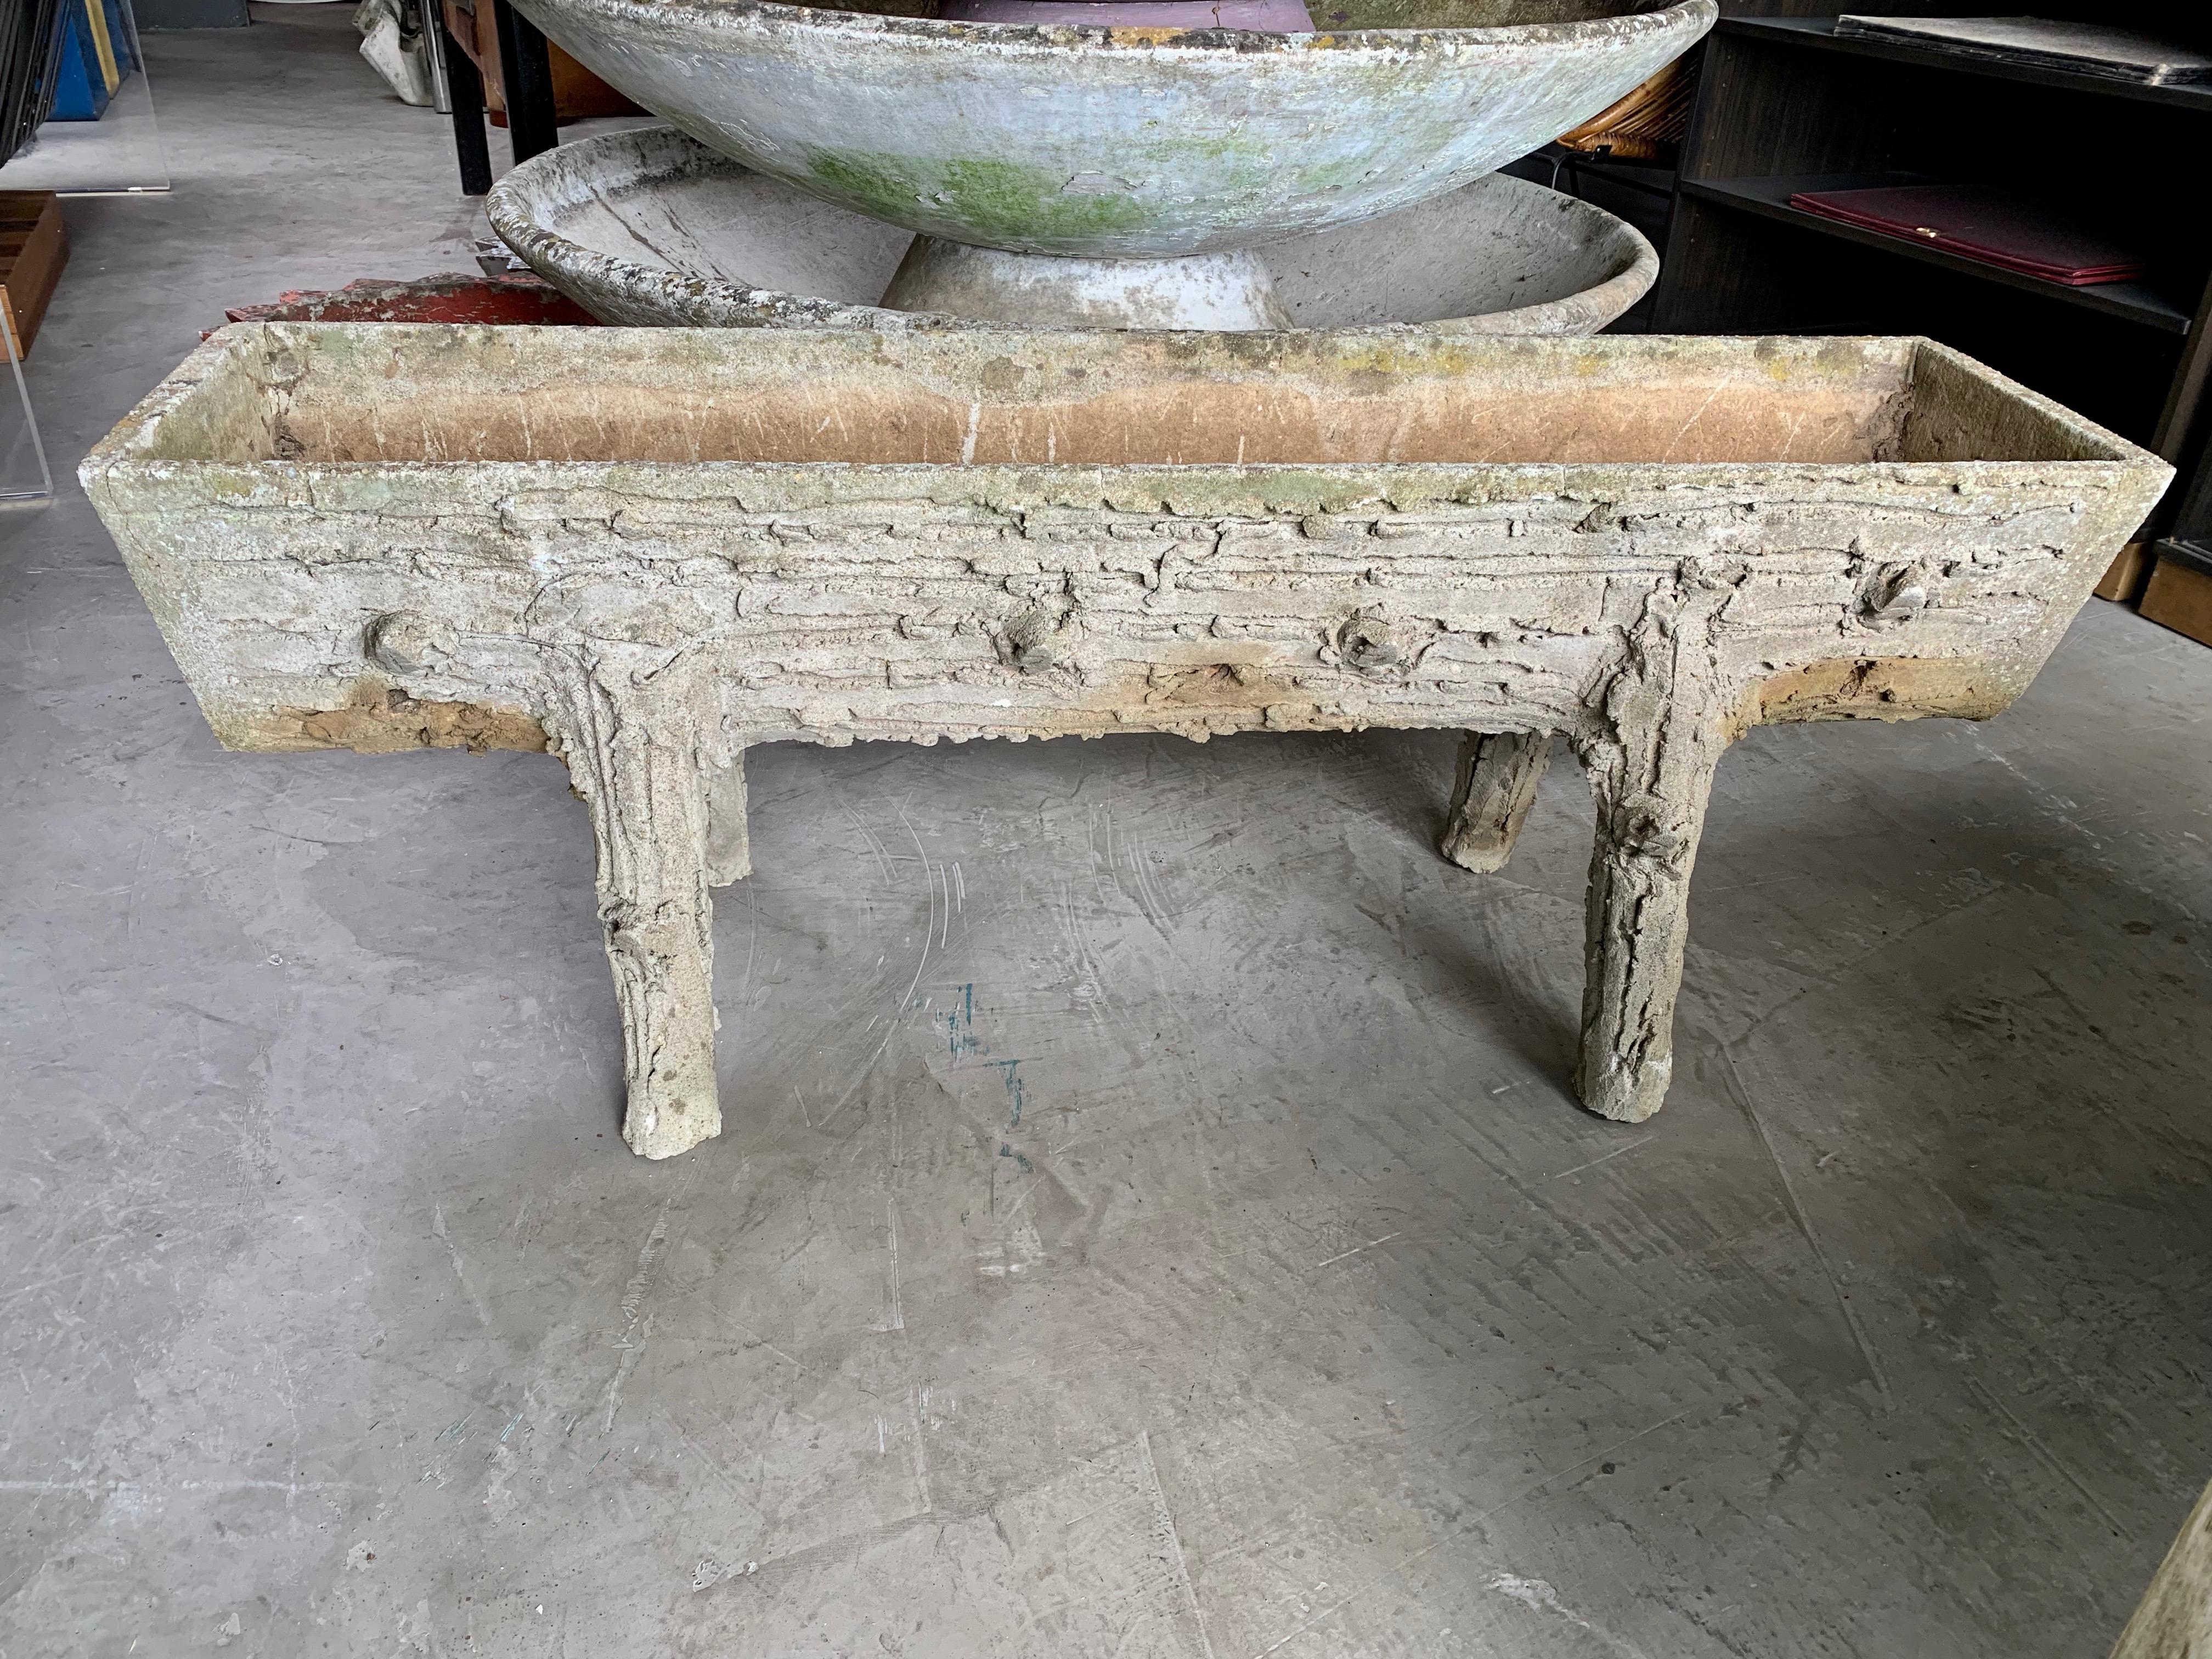 Stunning cement faux bois planter from France, circa 1950s. Great scale. Long rectangular planter in the shape of a trough. Good vintage condition. 4 feet long. Great sculptural piece for indoors or outside.